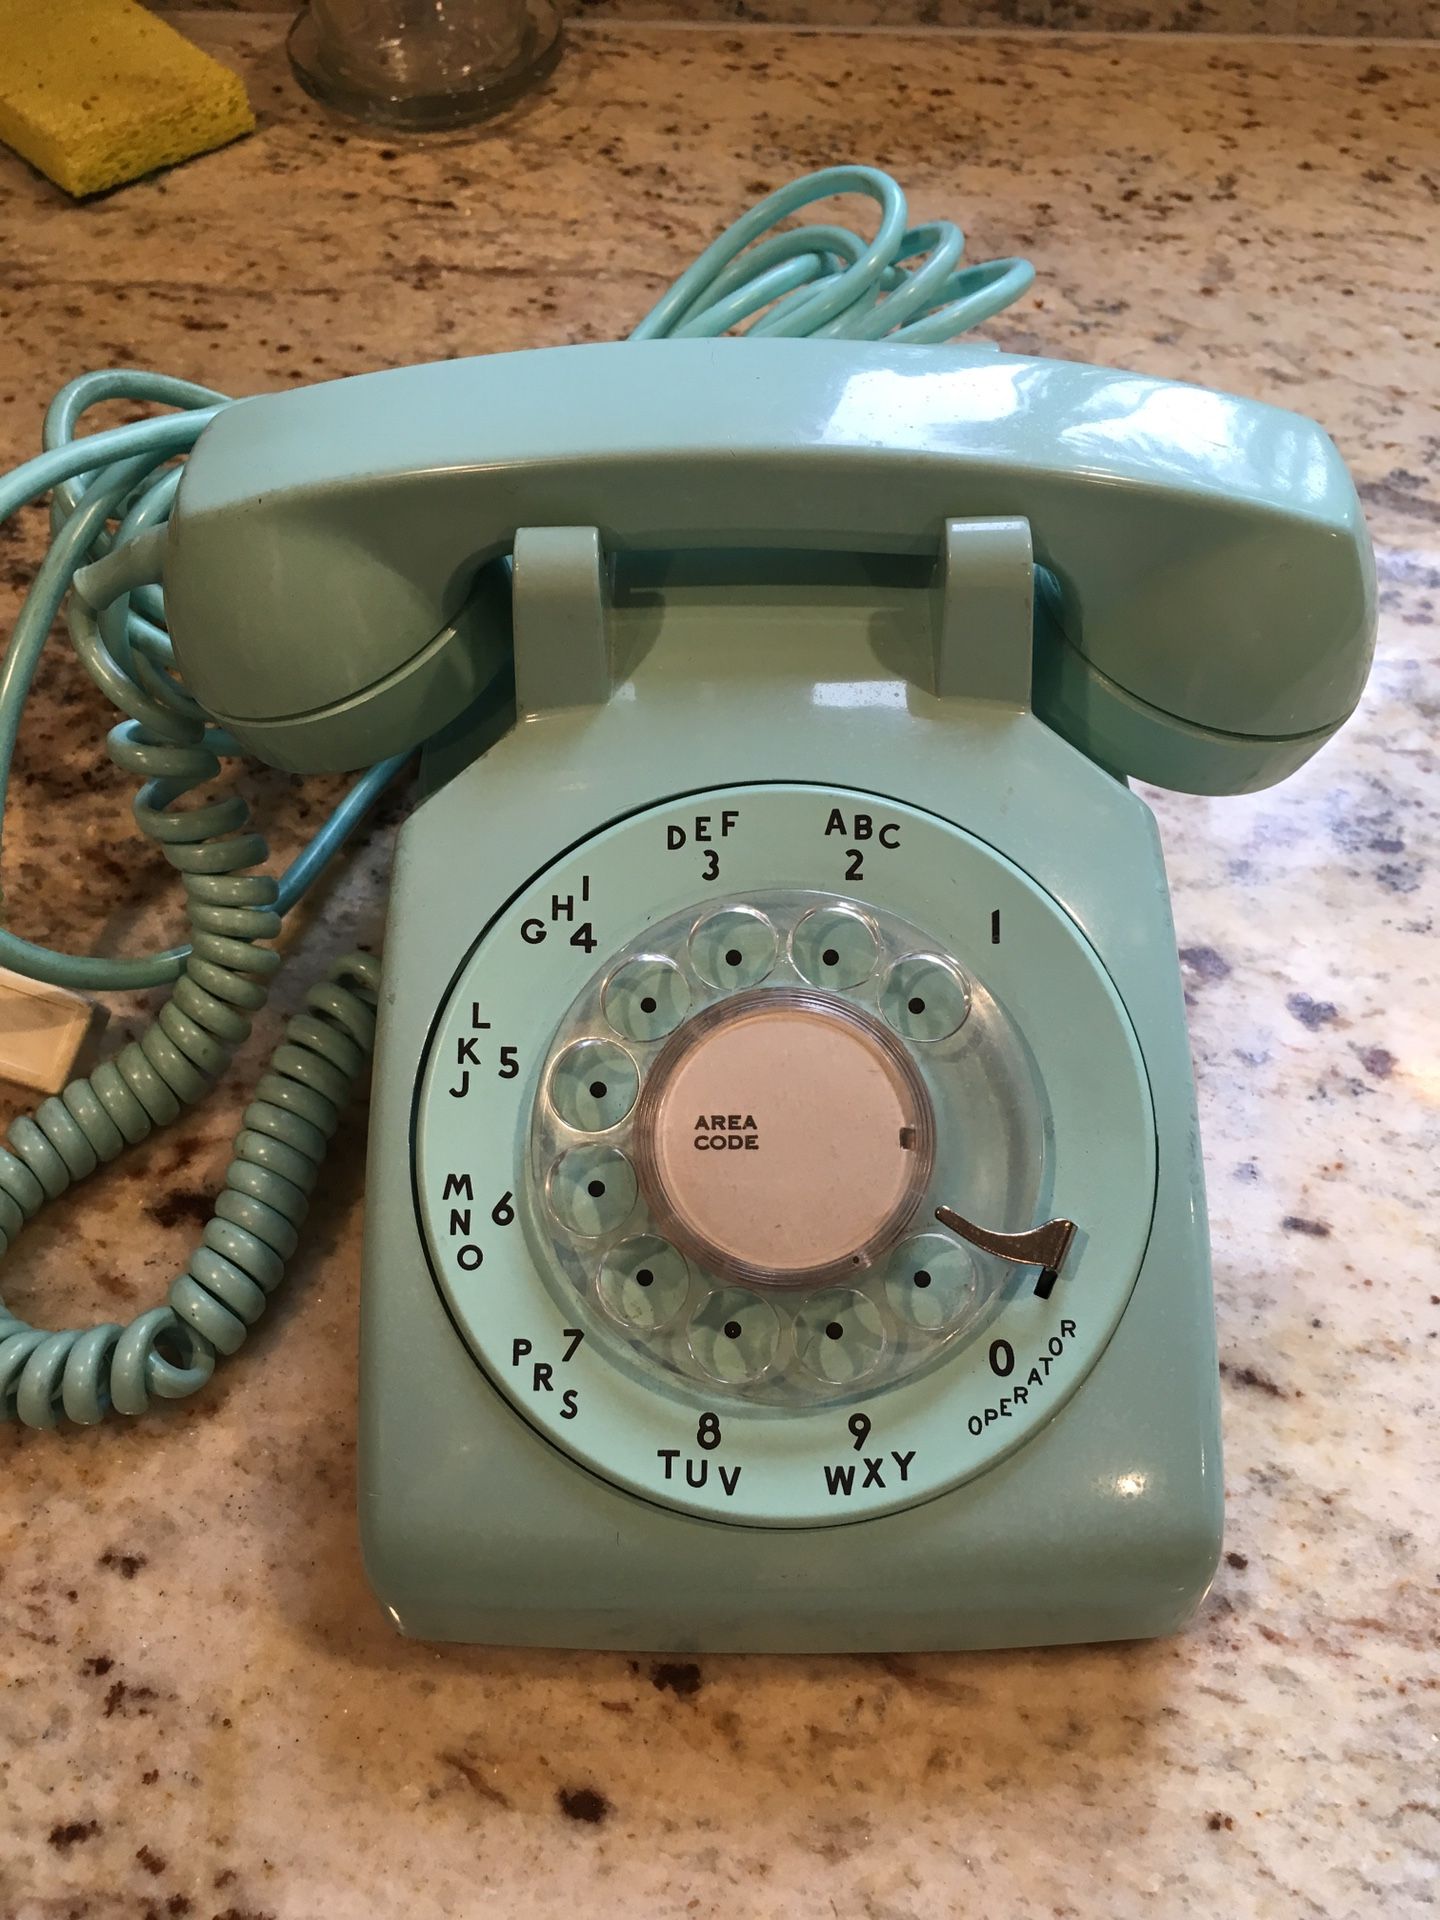 Old phone that dial phone